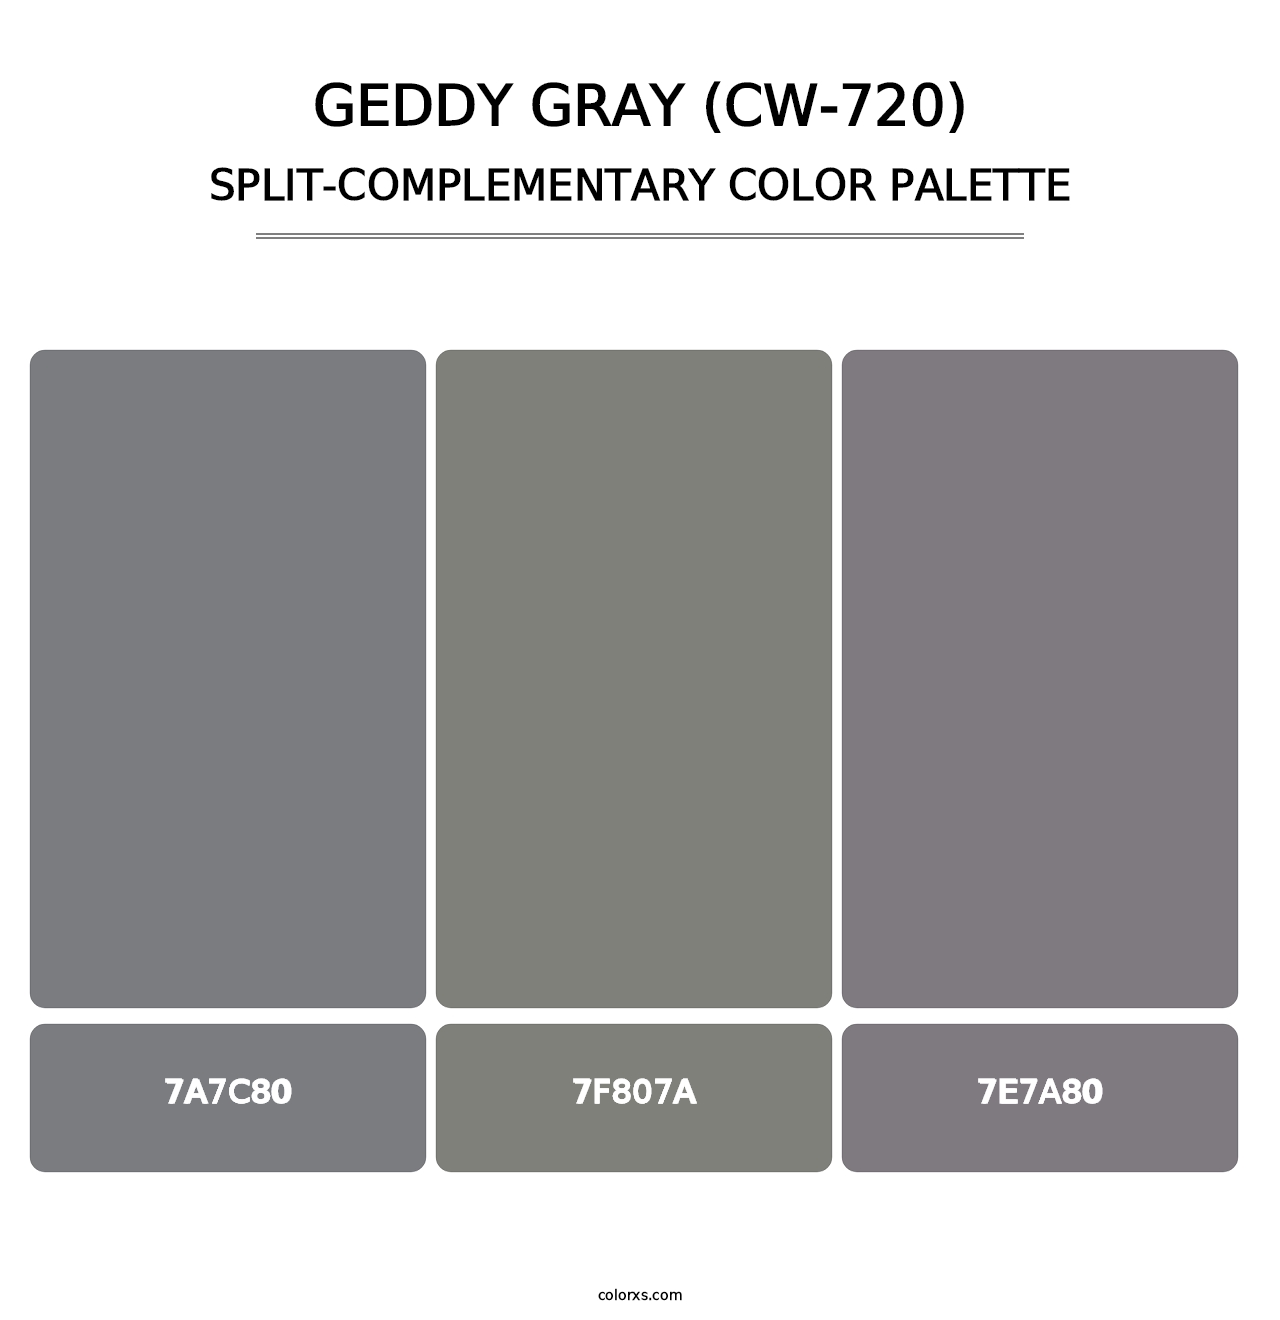 Geddy Gray (CW-720) - Split-Complementary Color Palette